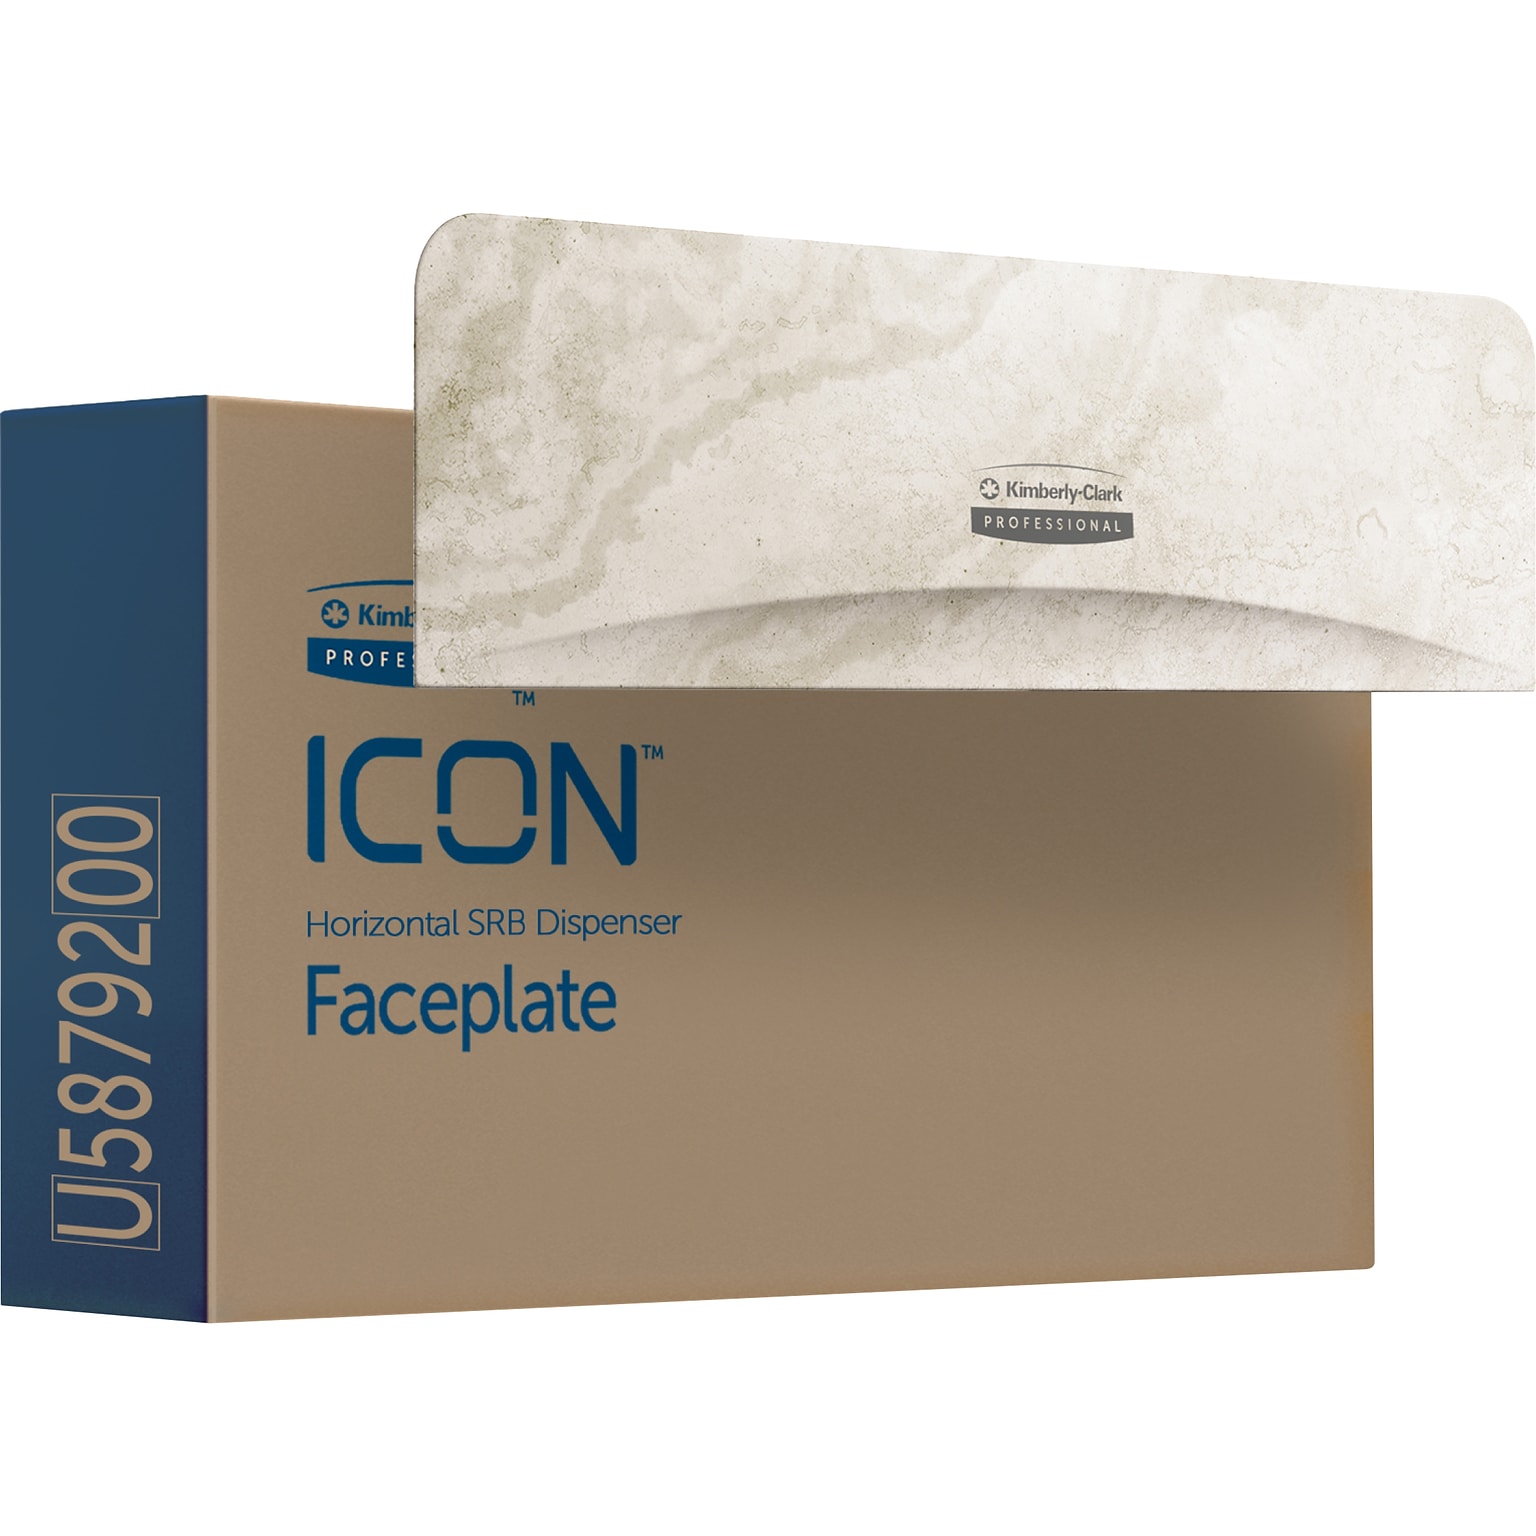 Kimberly-Clark Professional ICON Faceplate for Coreless Two-Roll Horizontal Toilet Paper Dispensers, Warm Marble (58792)